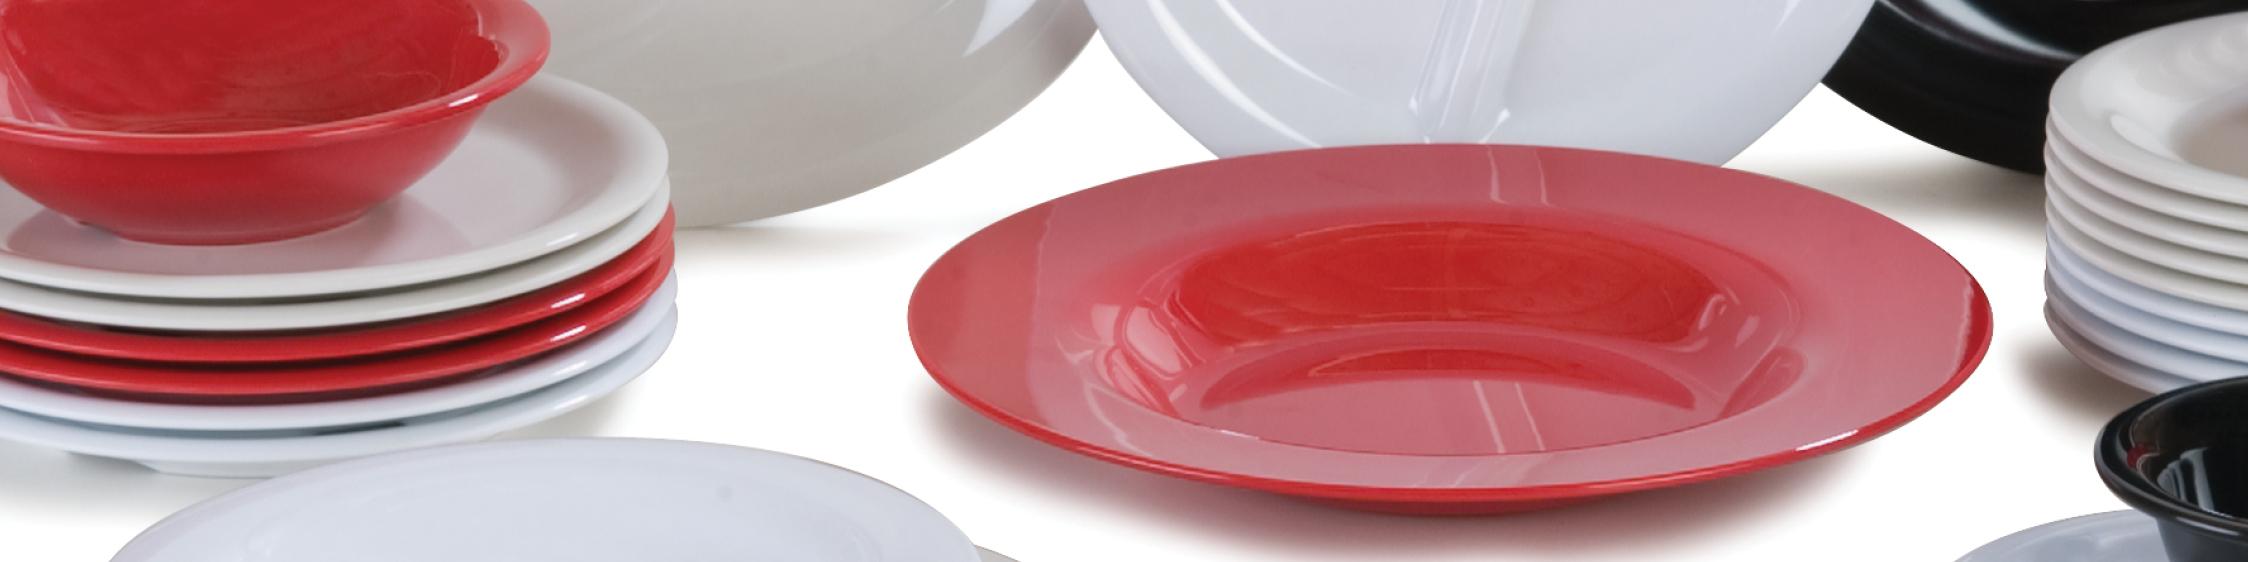 10.5 Pack of 12 Carlisle 3300005 Sierrus 3-Compartment / Divided Melamine Plates Red